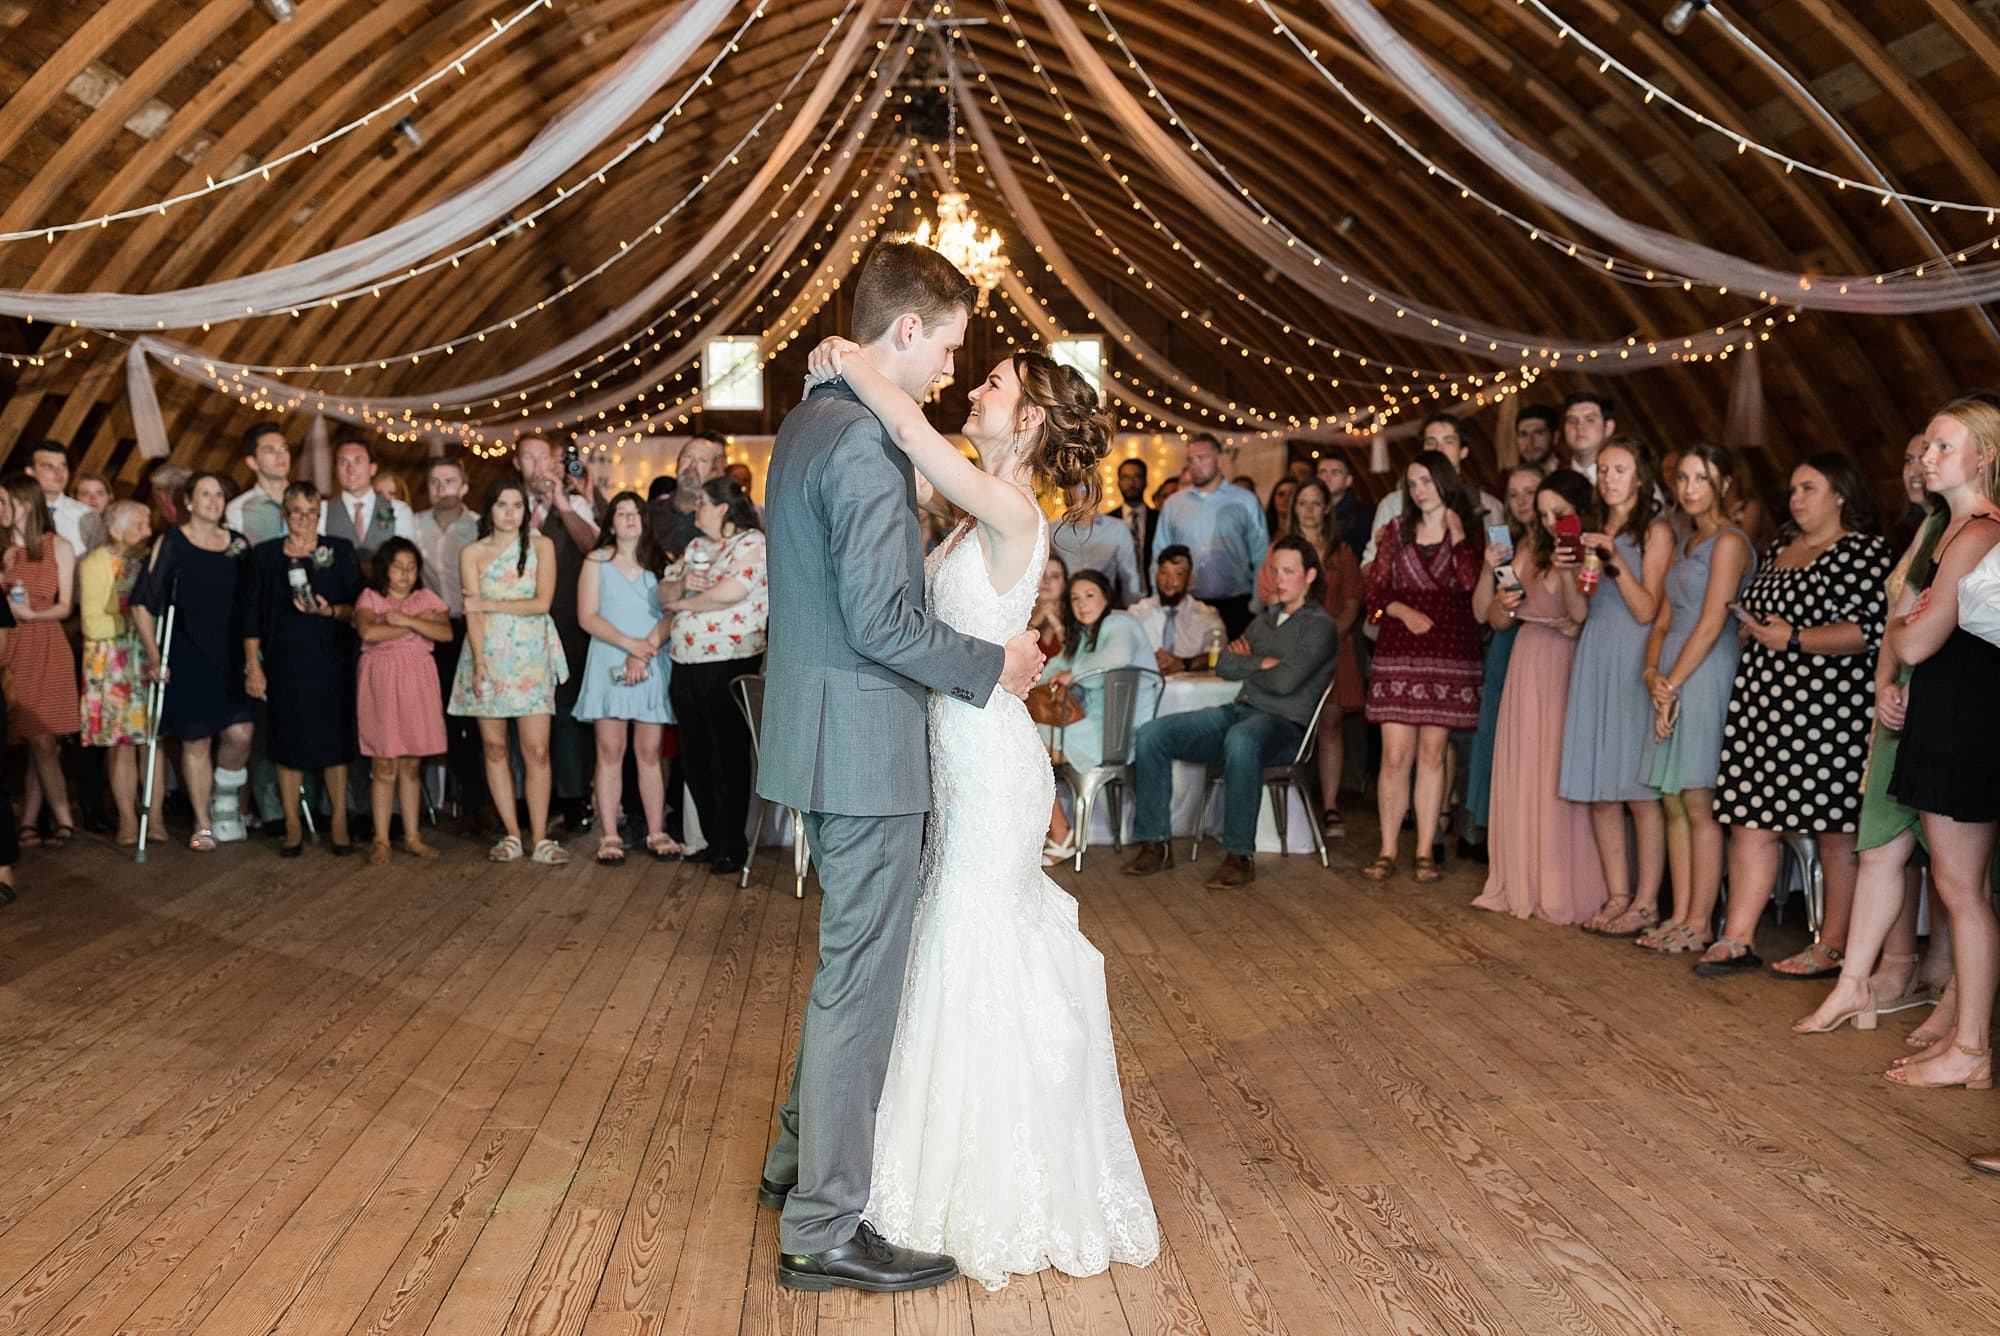 Bride and Groom share their first dance at their Legacy Acres Events wedding reception